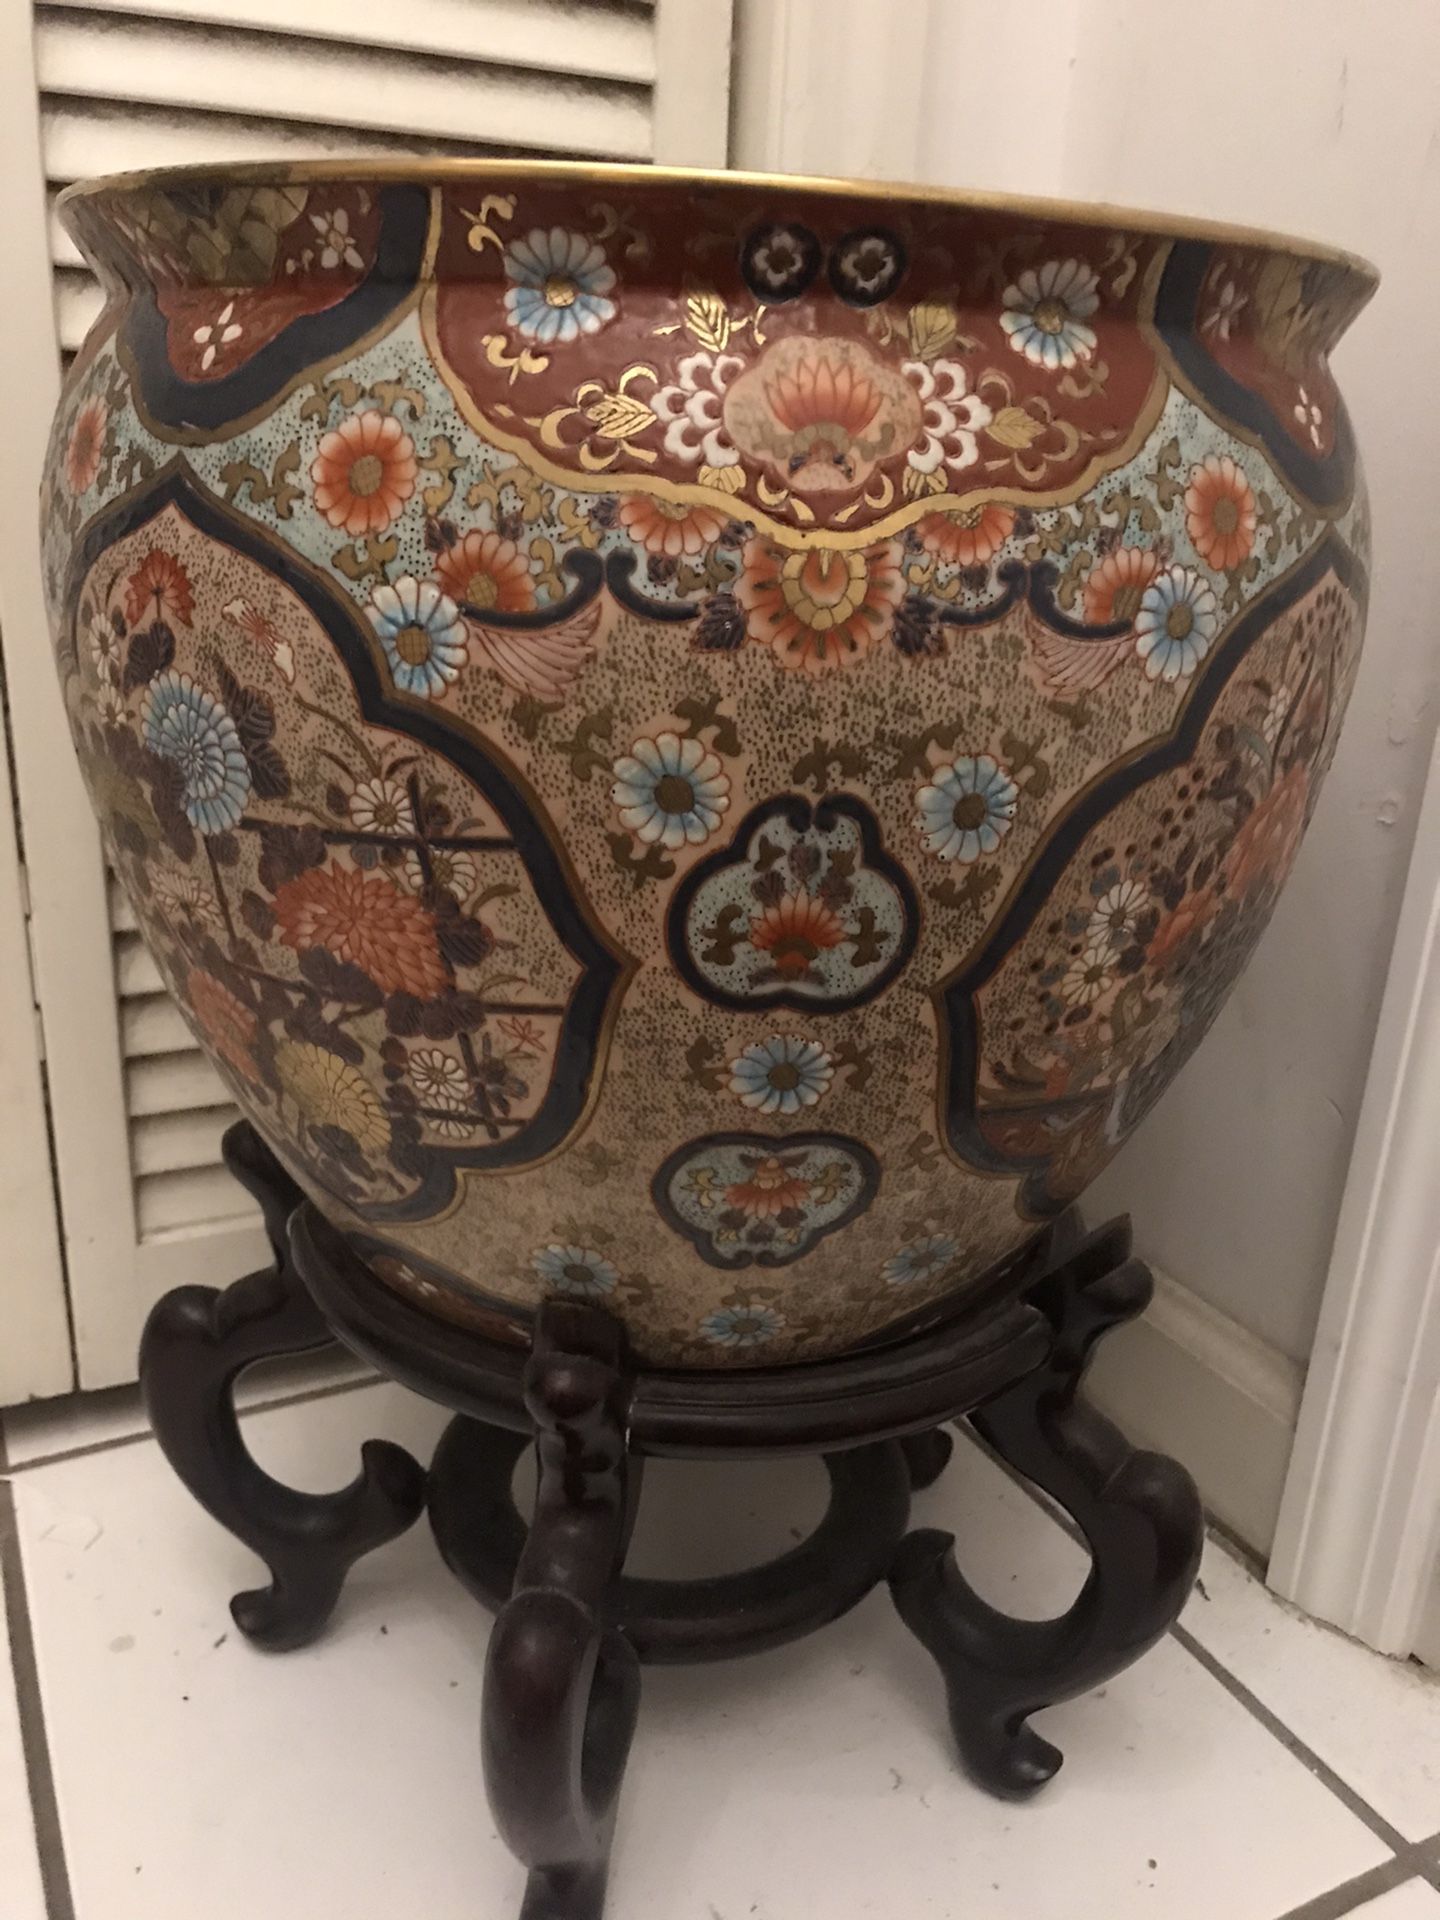 Highly Decorative Planter Pot and Stand